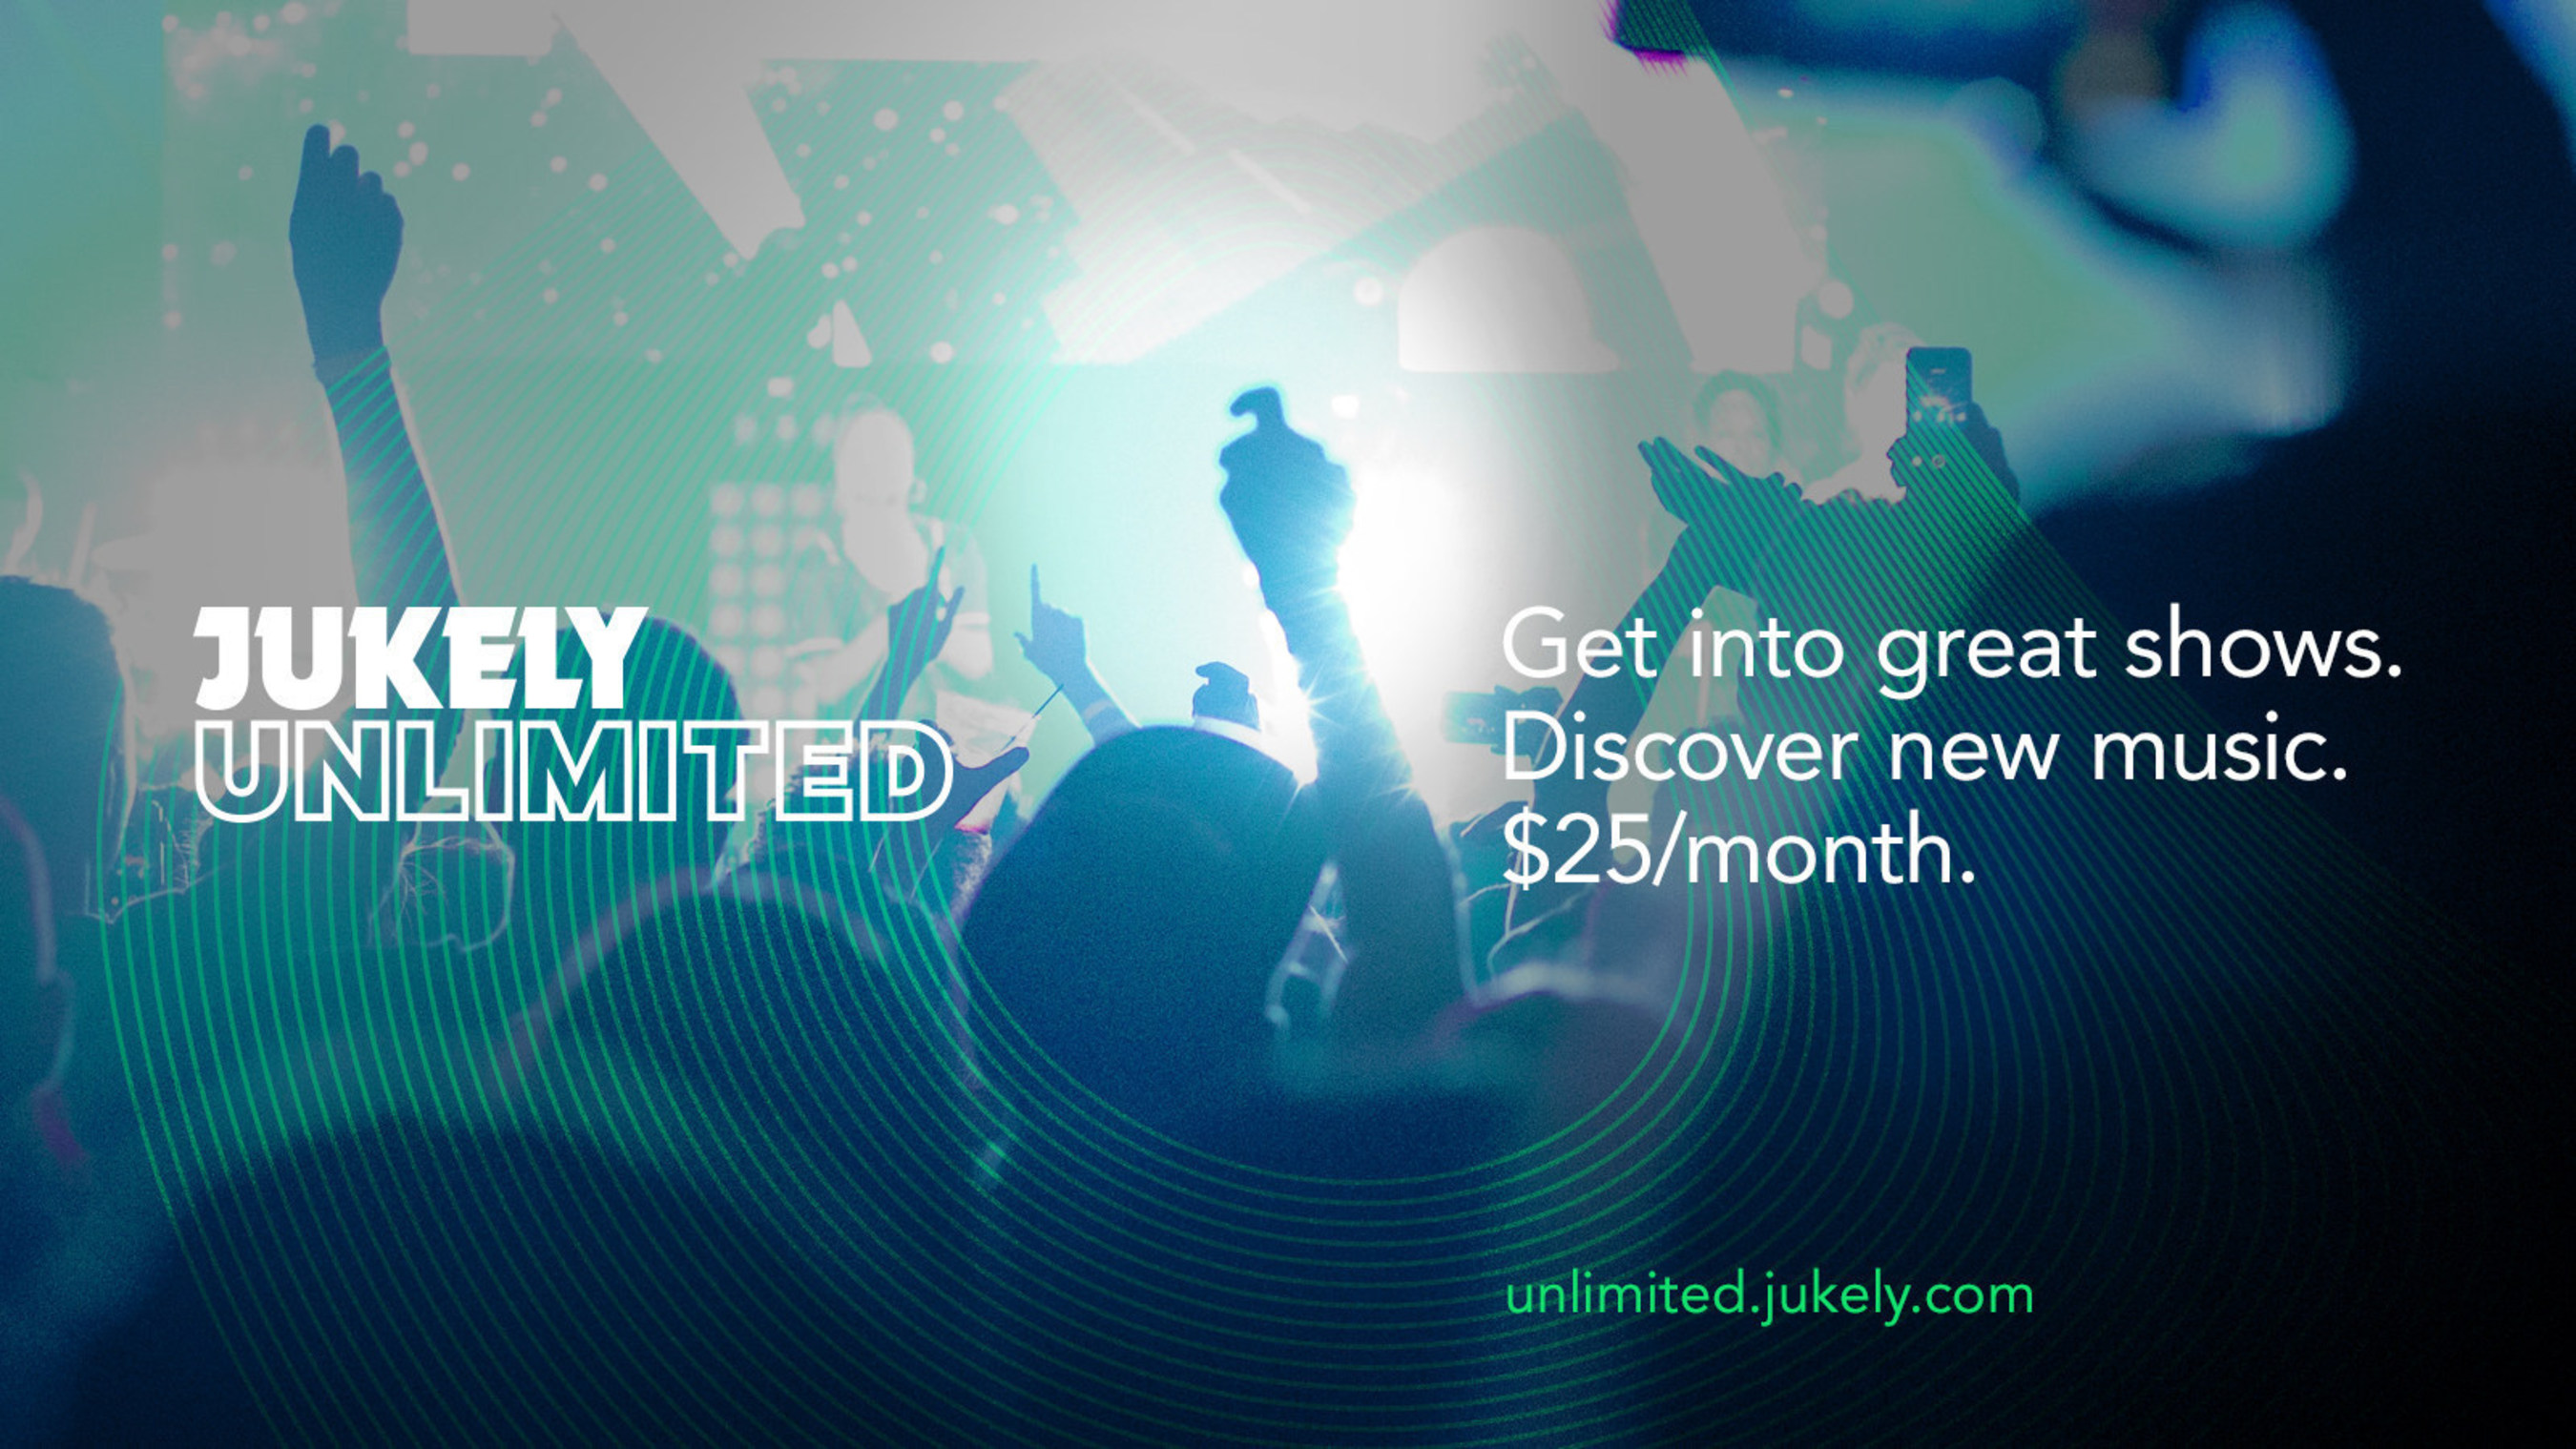 Jukely Unlimited